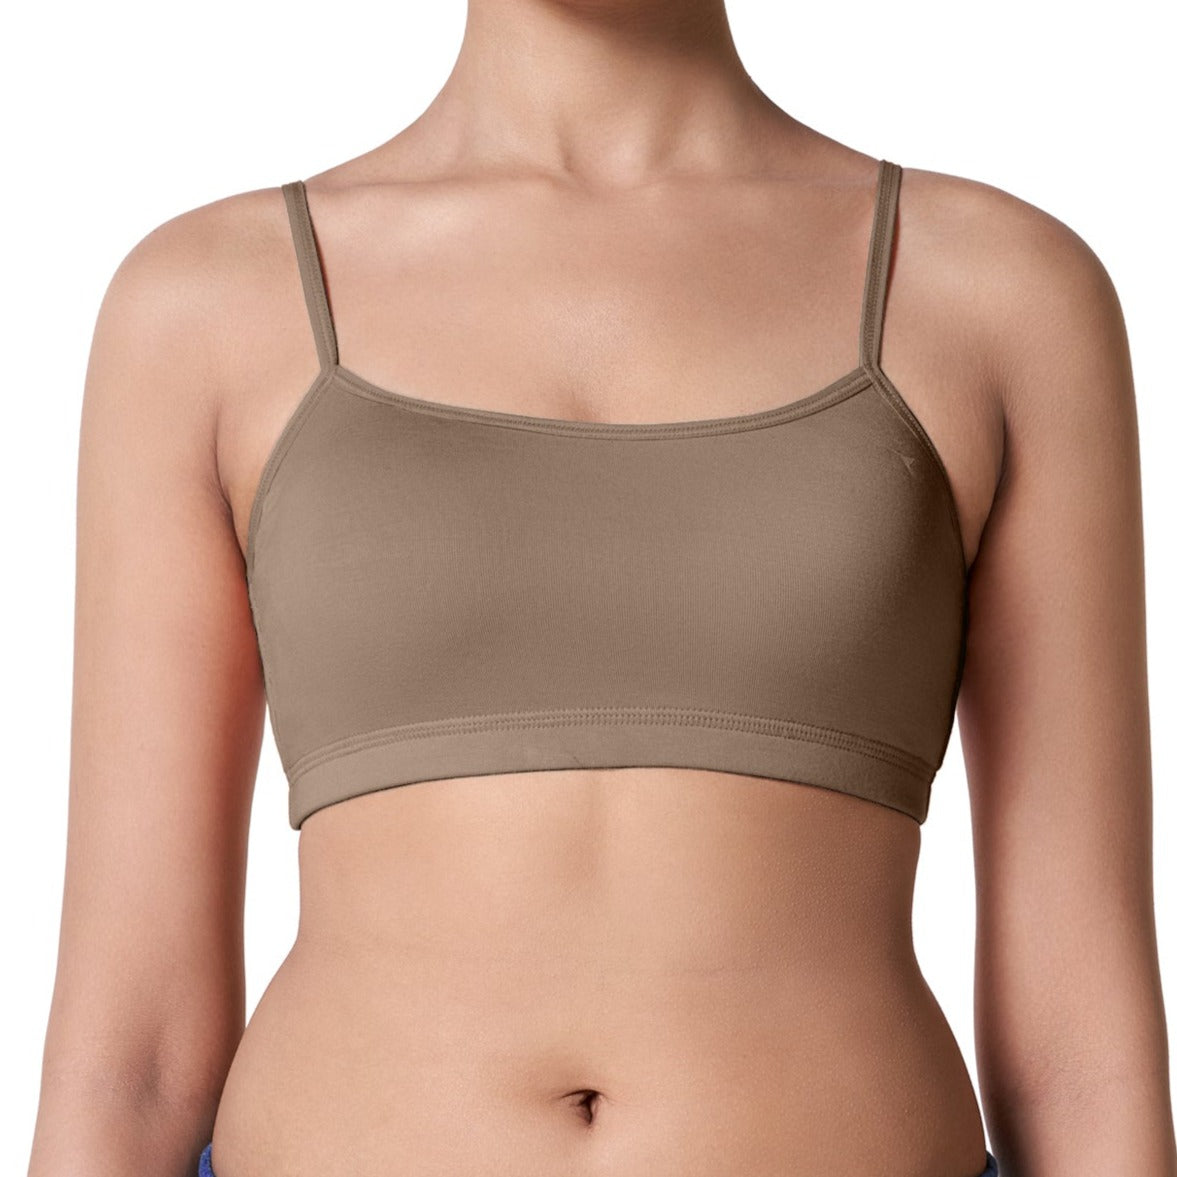 blossom-starters bra-camel brown3-teen collection